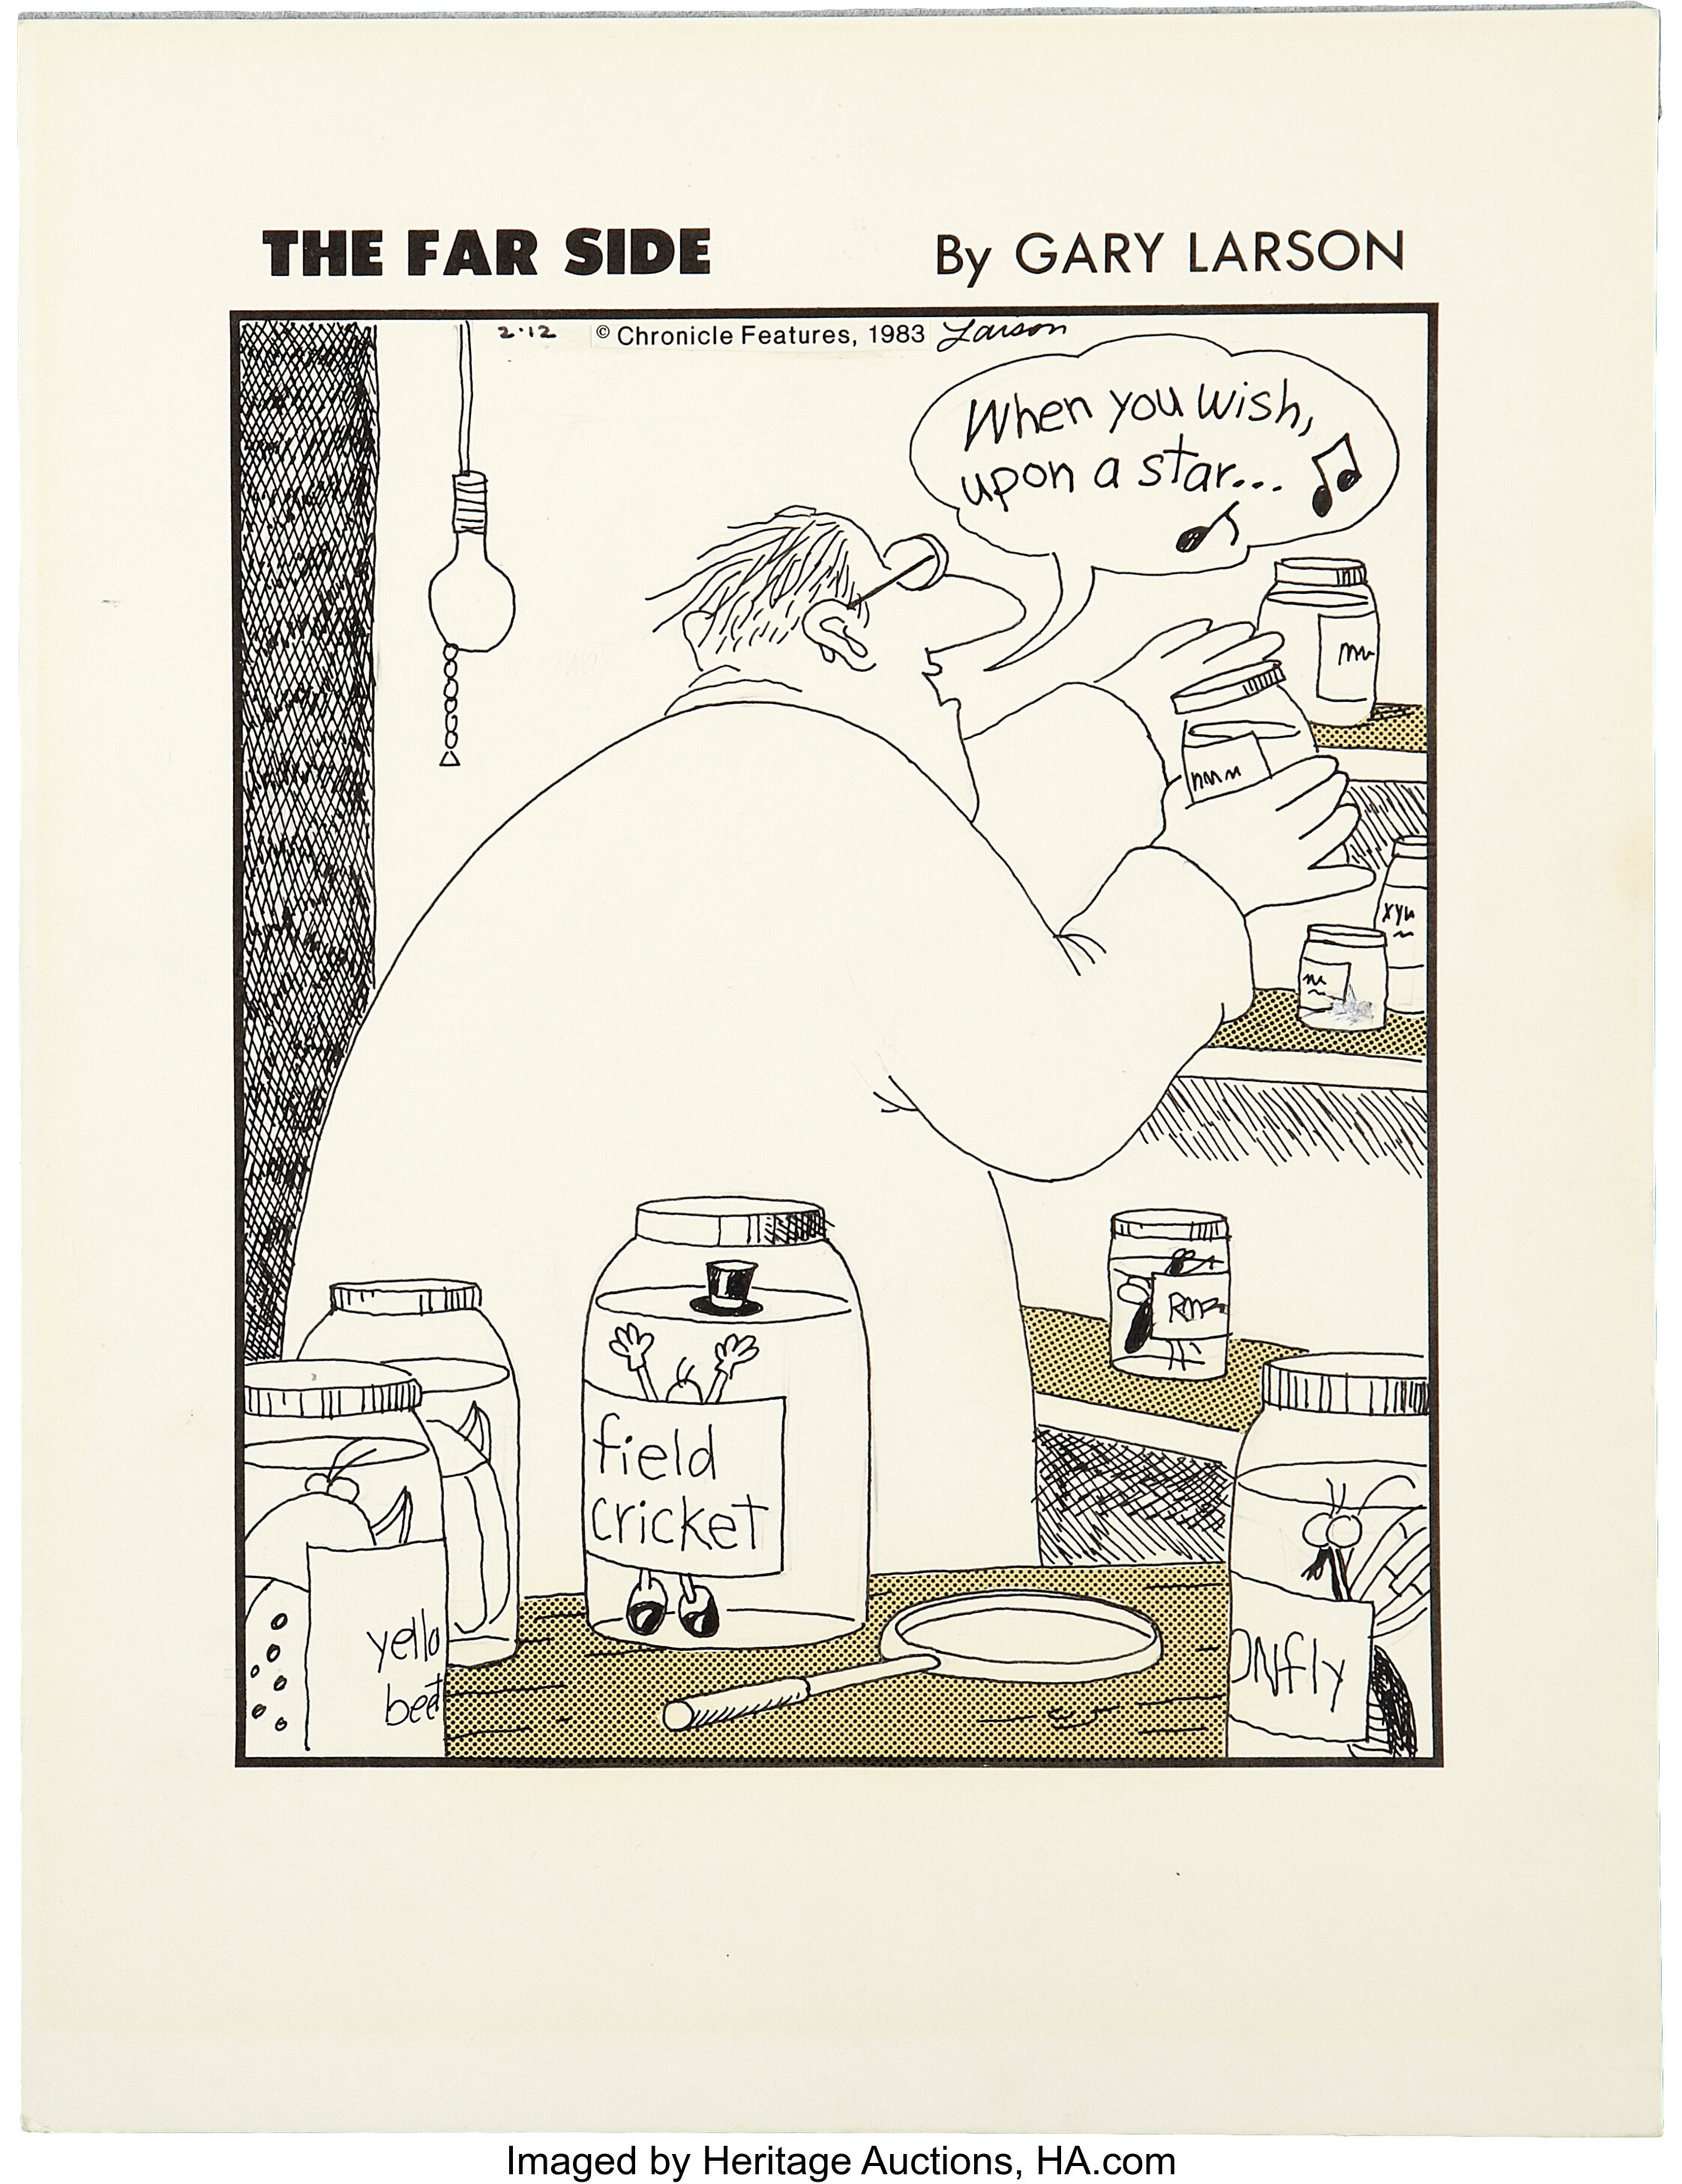 gary-larson-the-far-side-daily-comic-strip-original-art-dated-lot-92162-heritage-auctions